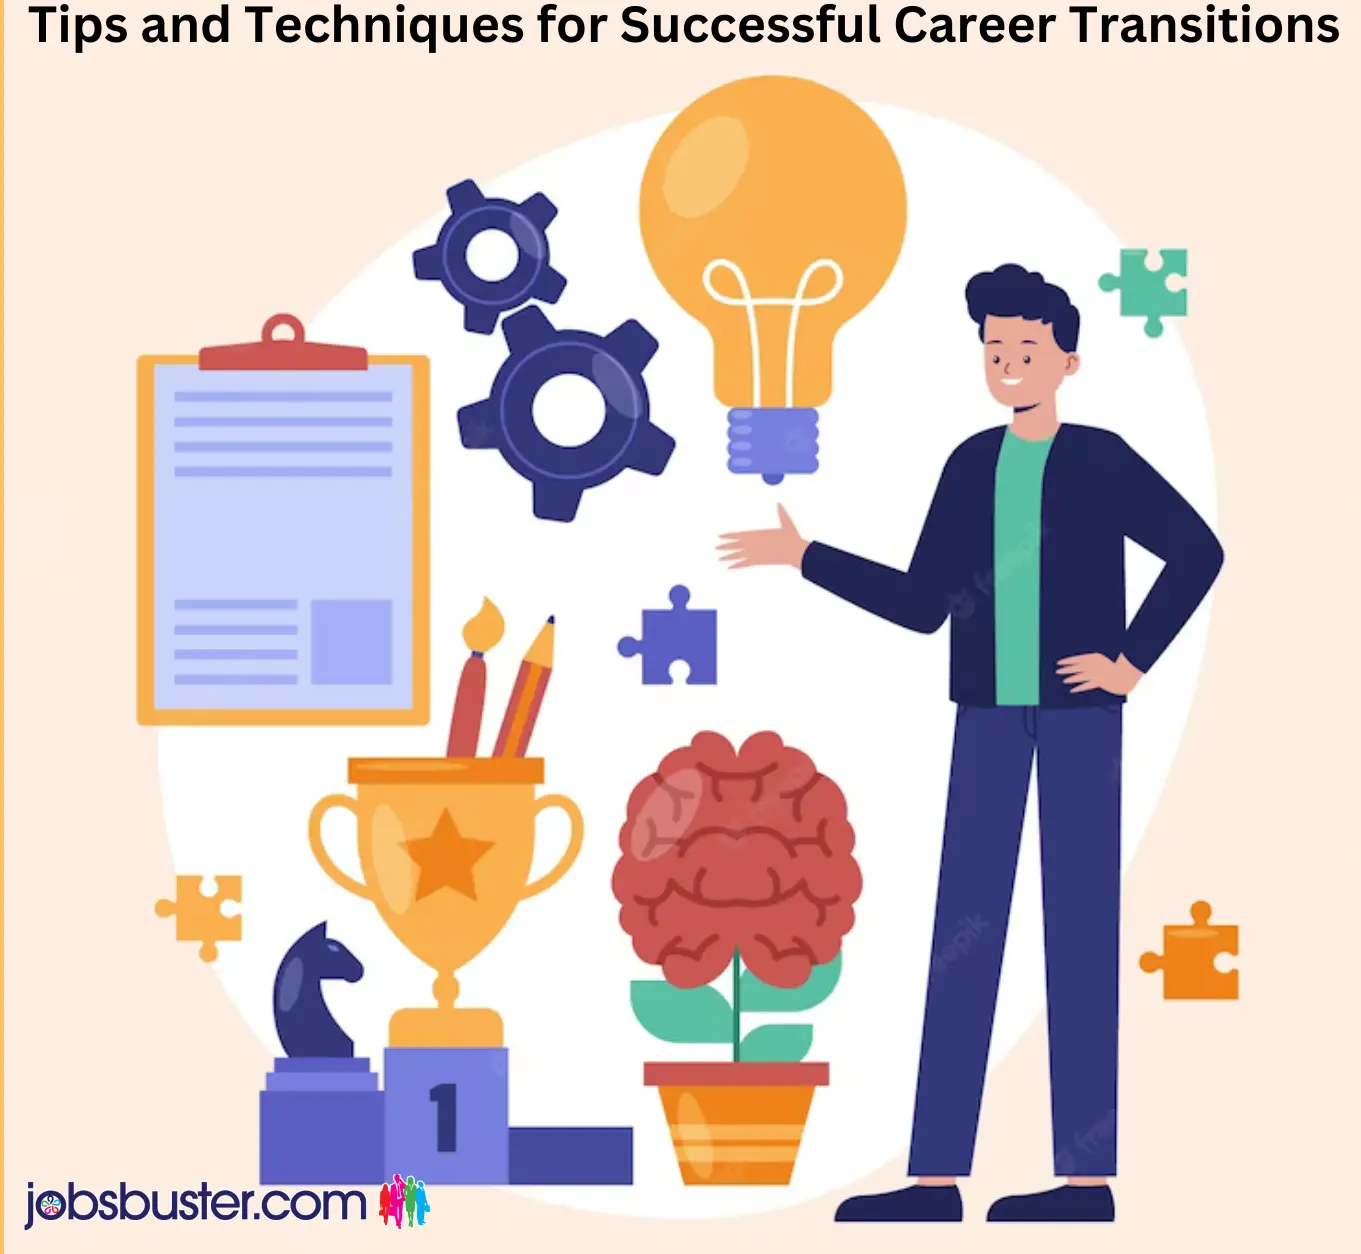 Tips and Techniques for Successful Career Transitions